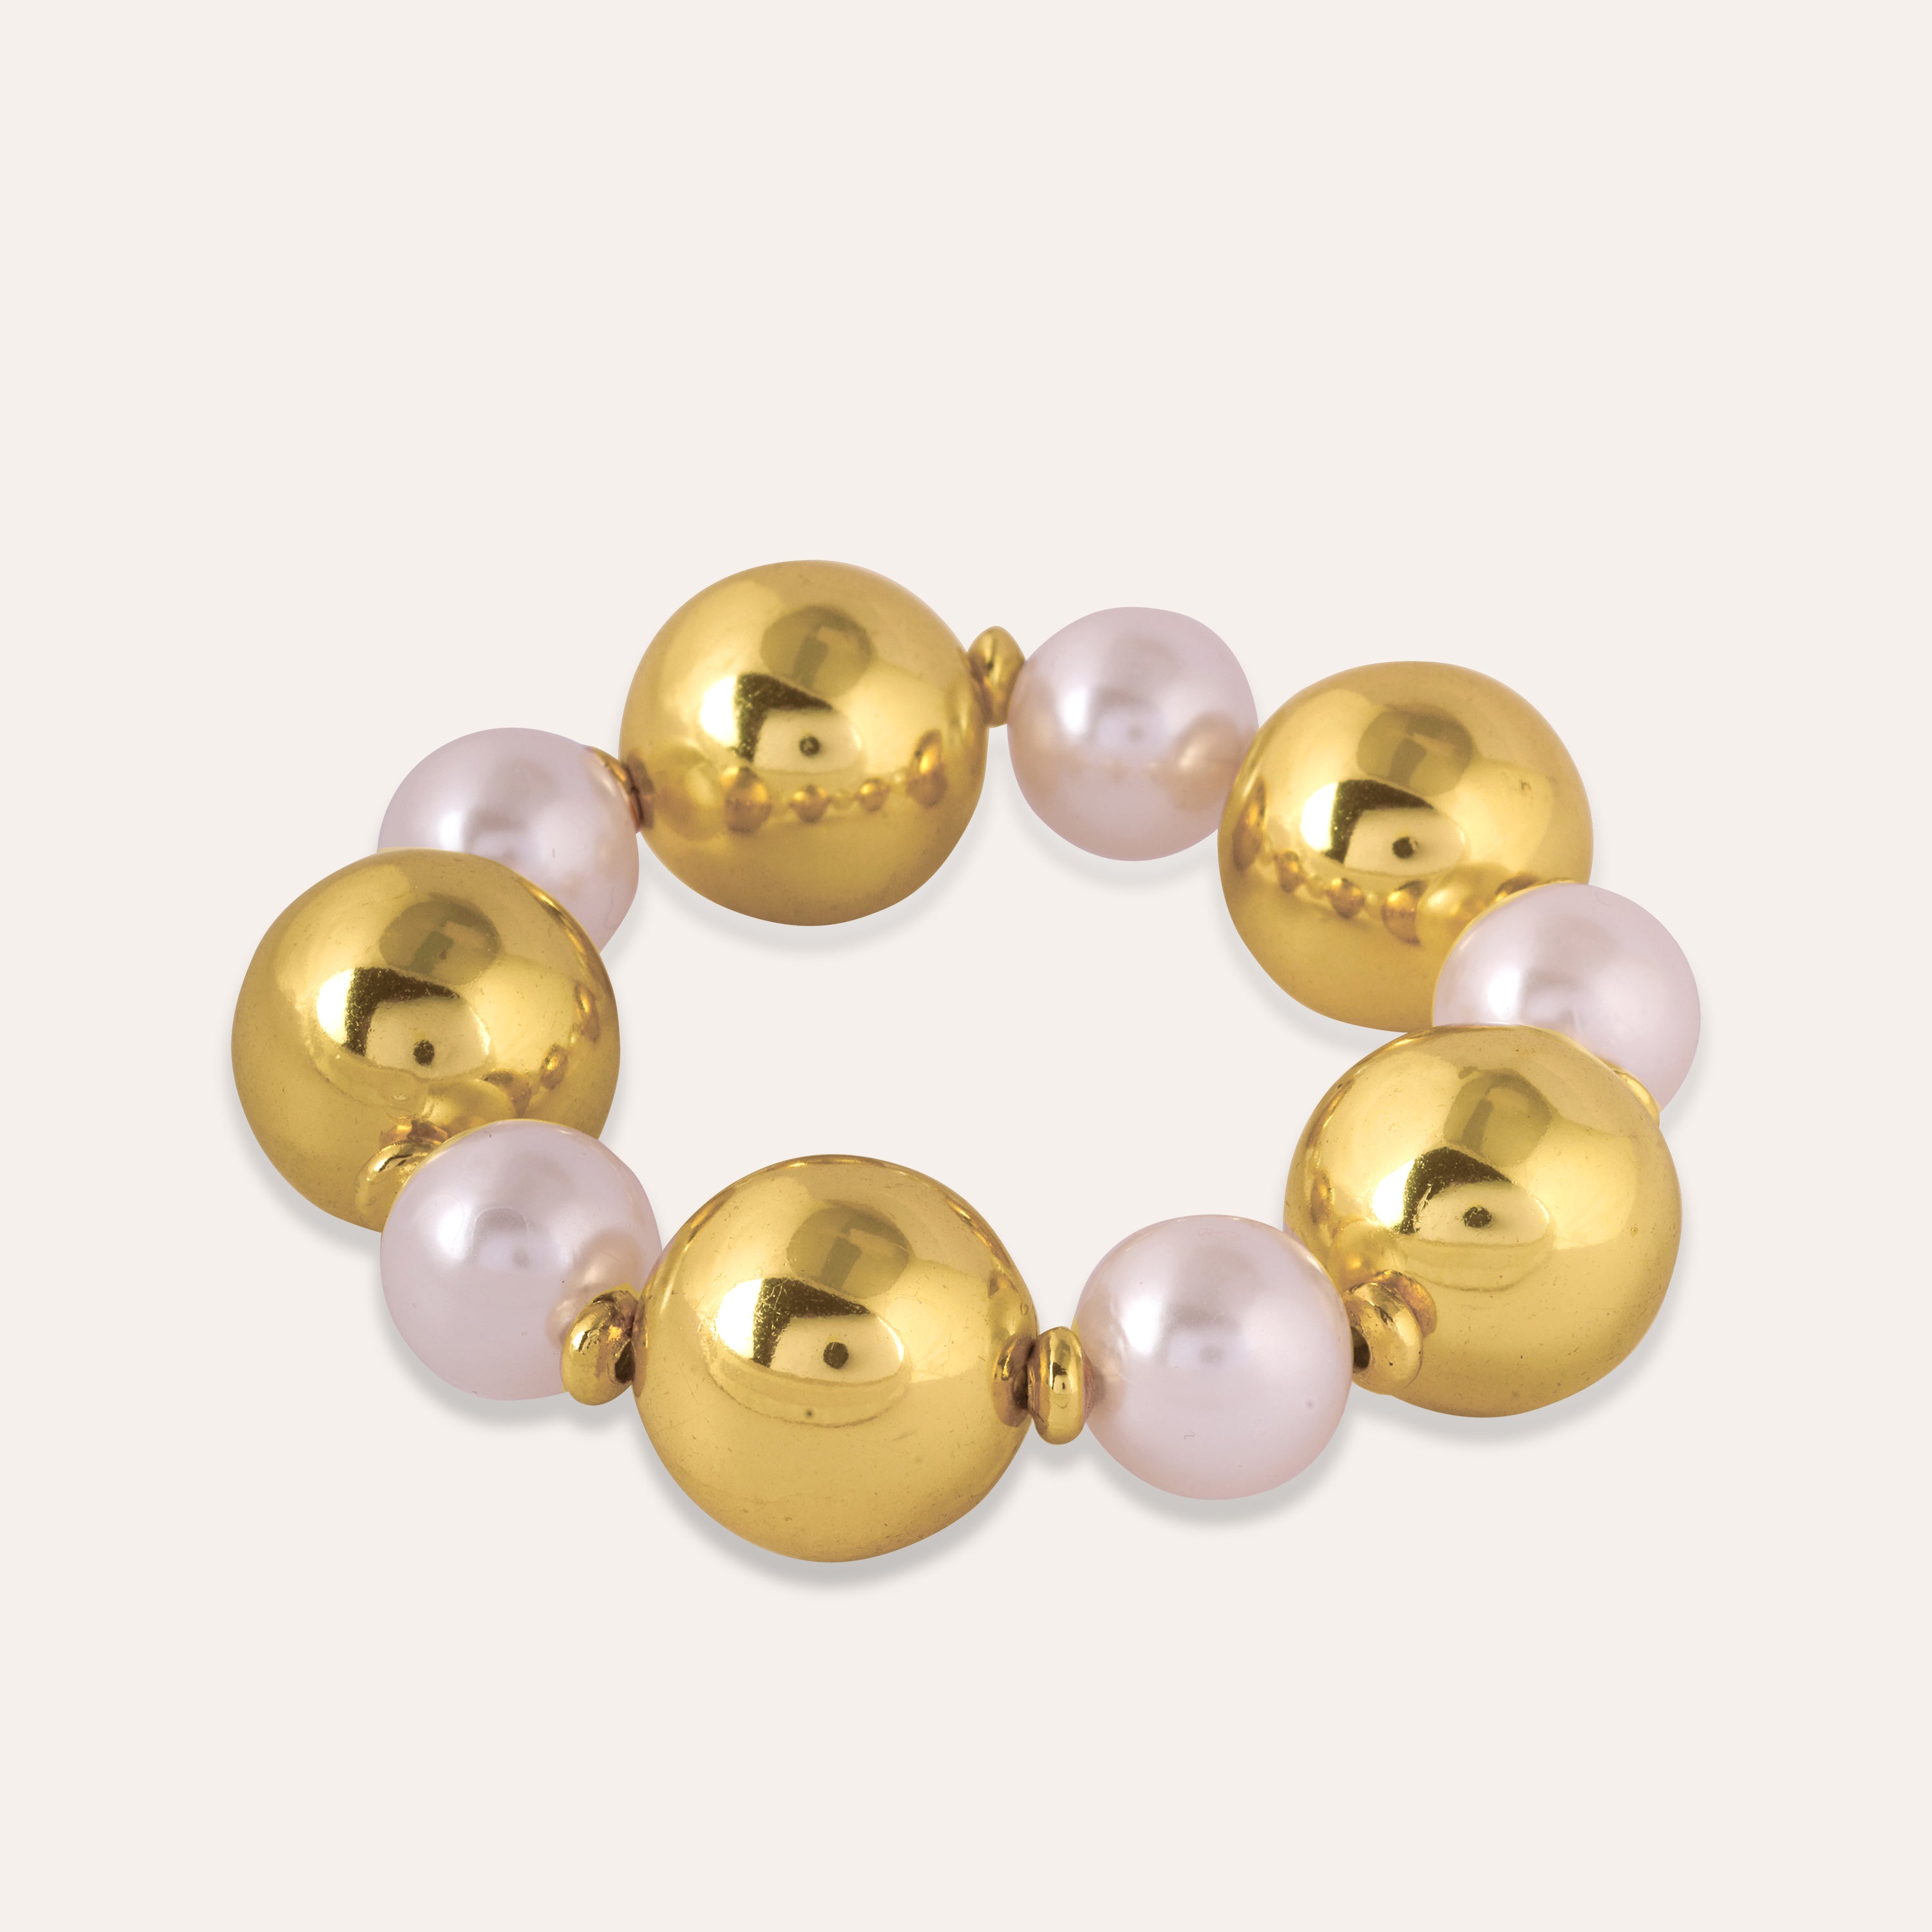 TFC Bold And Gold Pearl Bead Bracelet-Discover our stunning collection of stylish bracelets for women, featuring exquisite pearl bracelets, handcrafted beaded bracelets, and elegant gold-plated designs. Enjoy cheapest anti-tarnish fashion jewellery and long-lasting brilliance onl